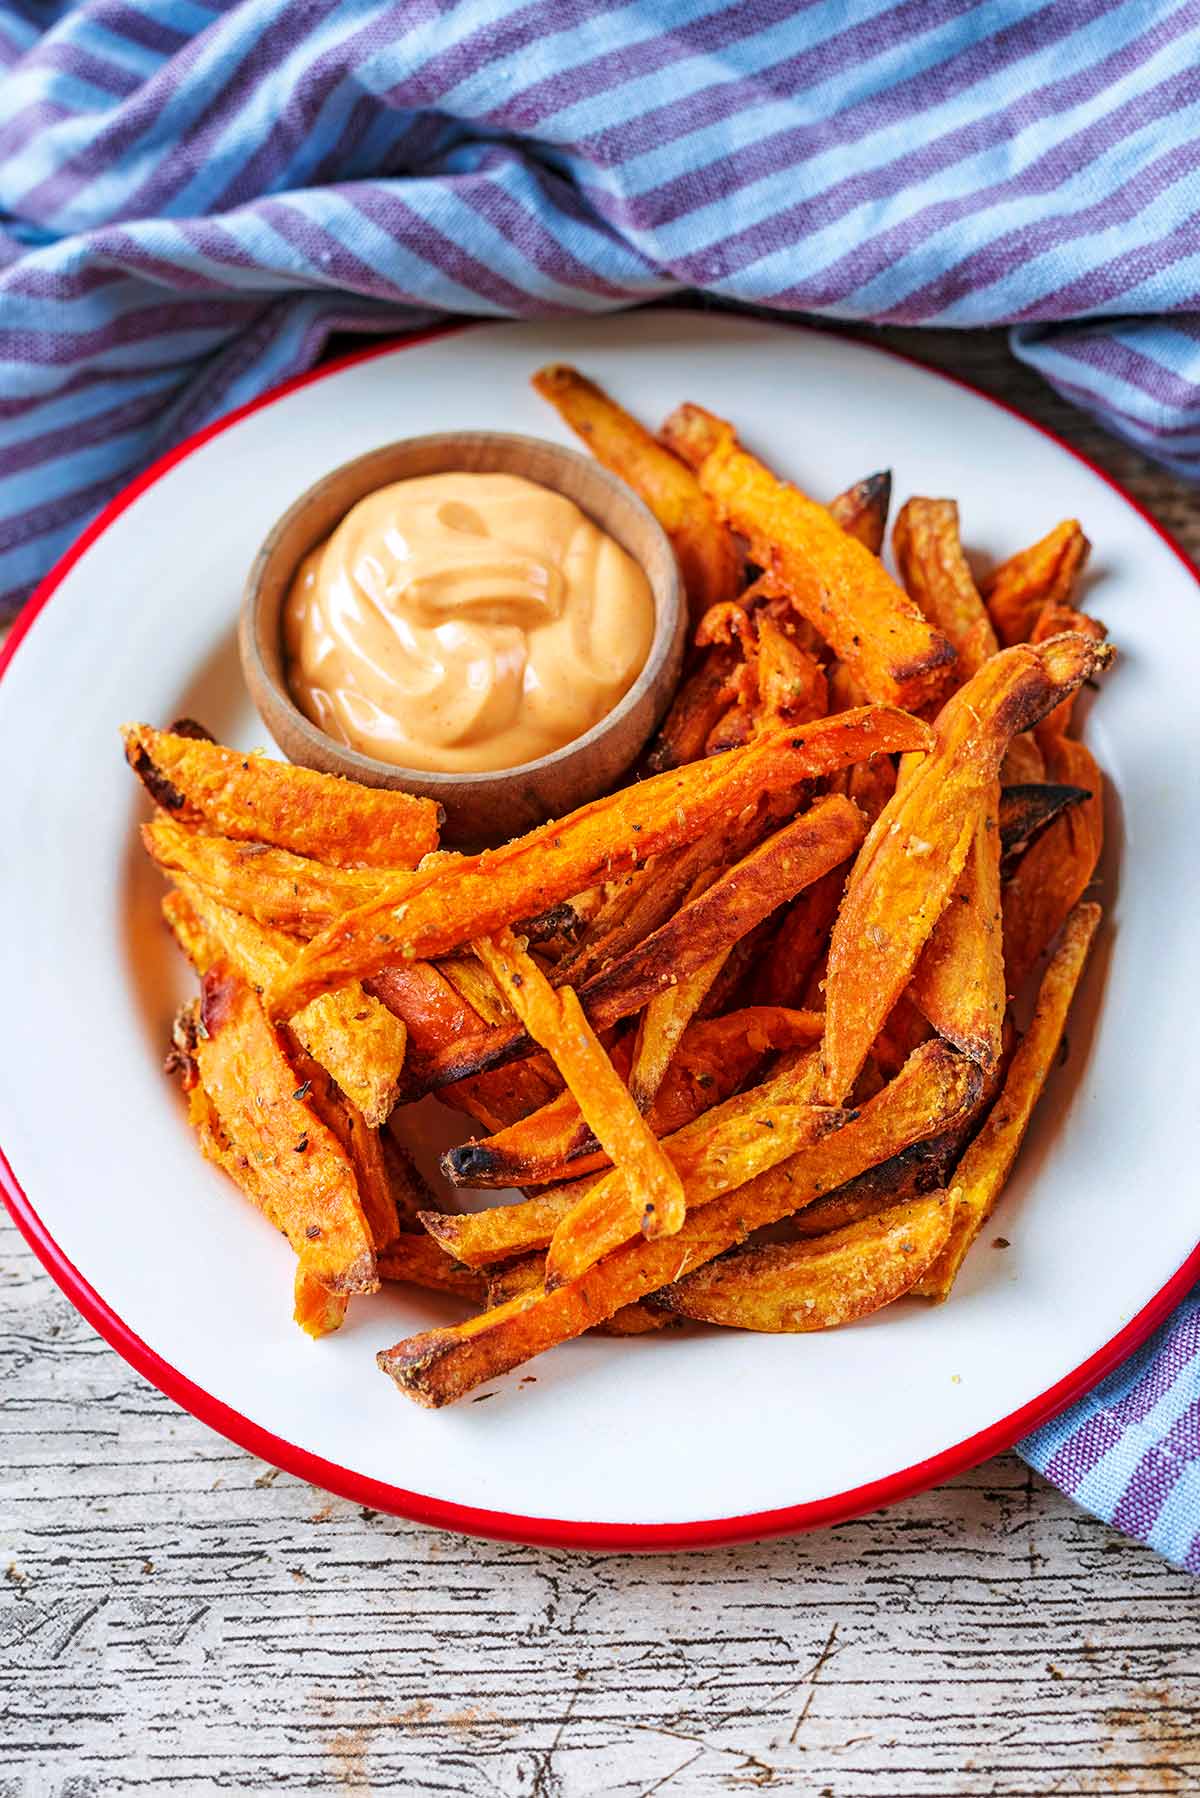 Sweet potato fries on a red and white plate.